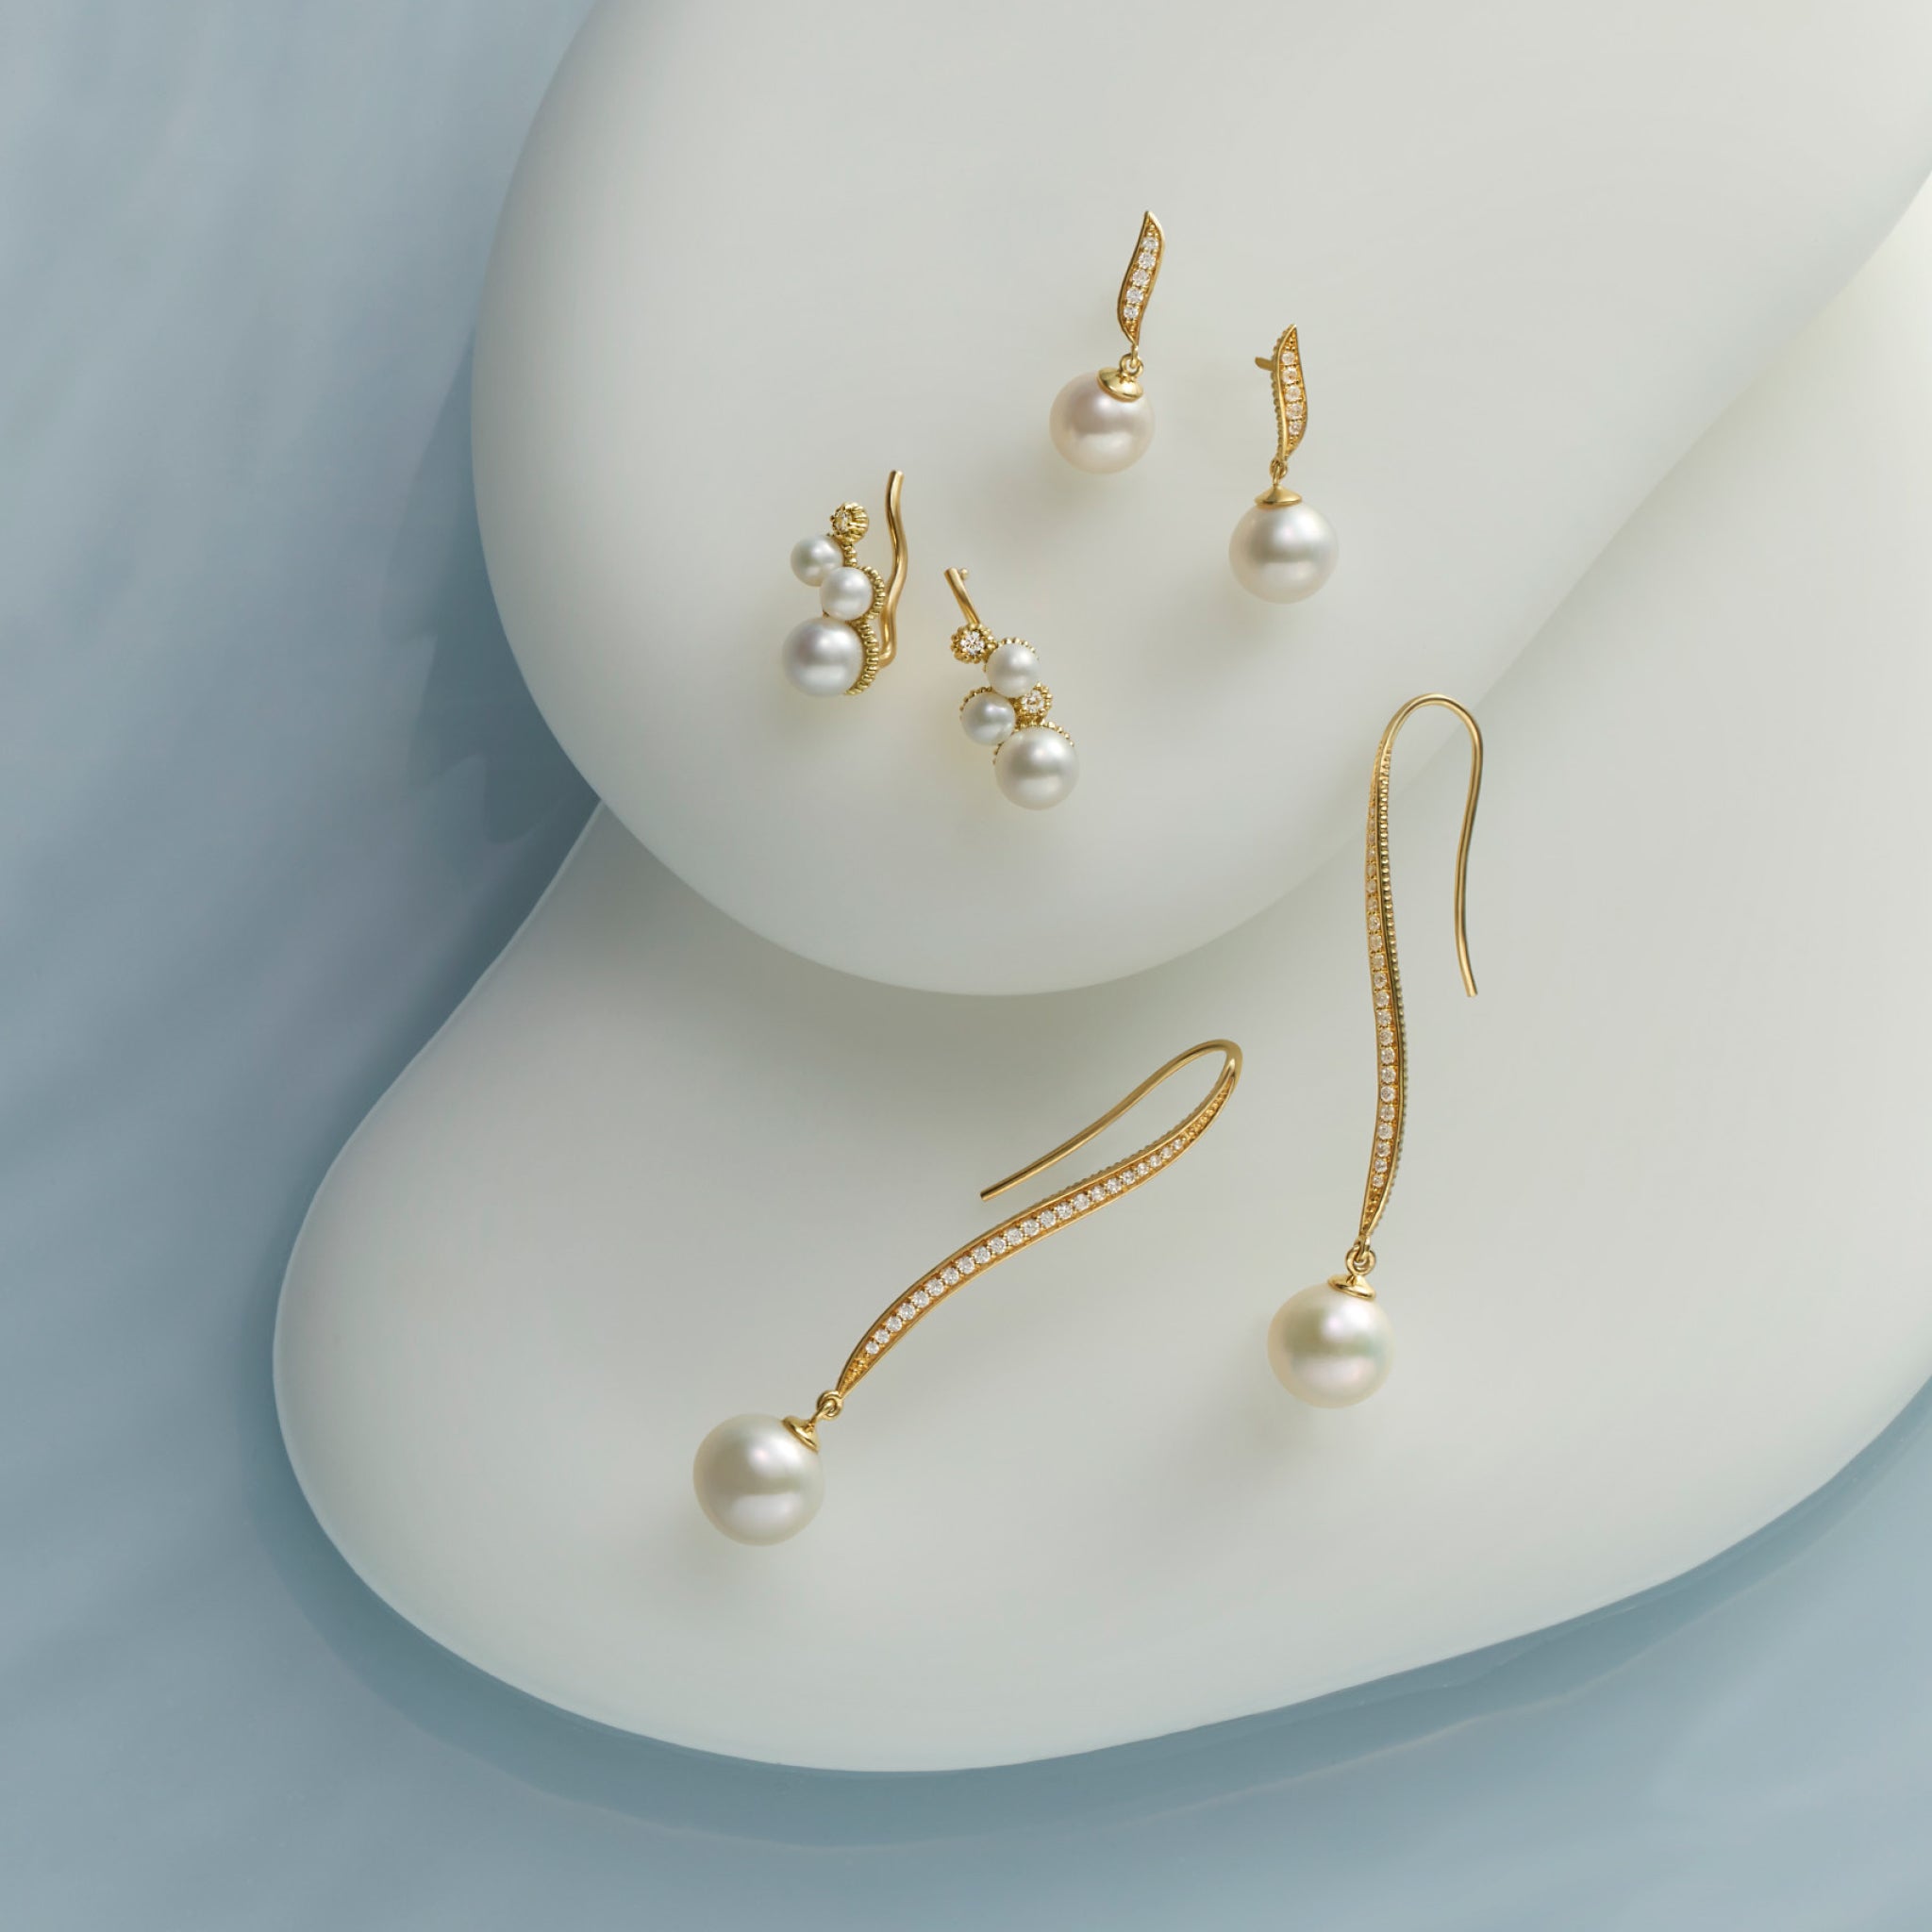 Shima Ear Climbers with Freshwater Pearls and Diamonds in 18K